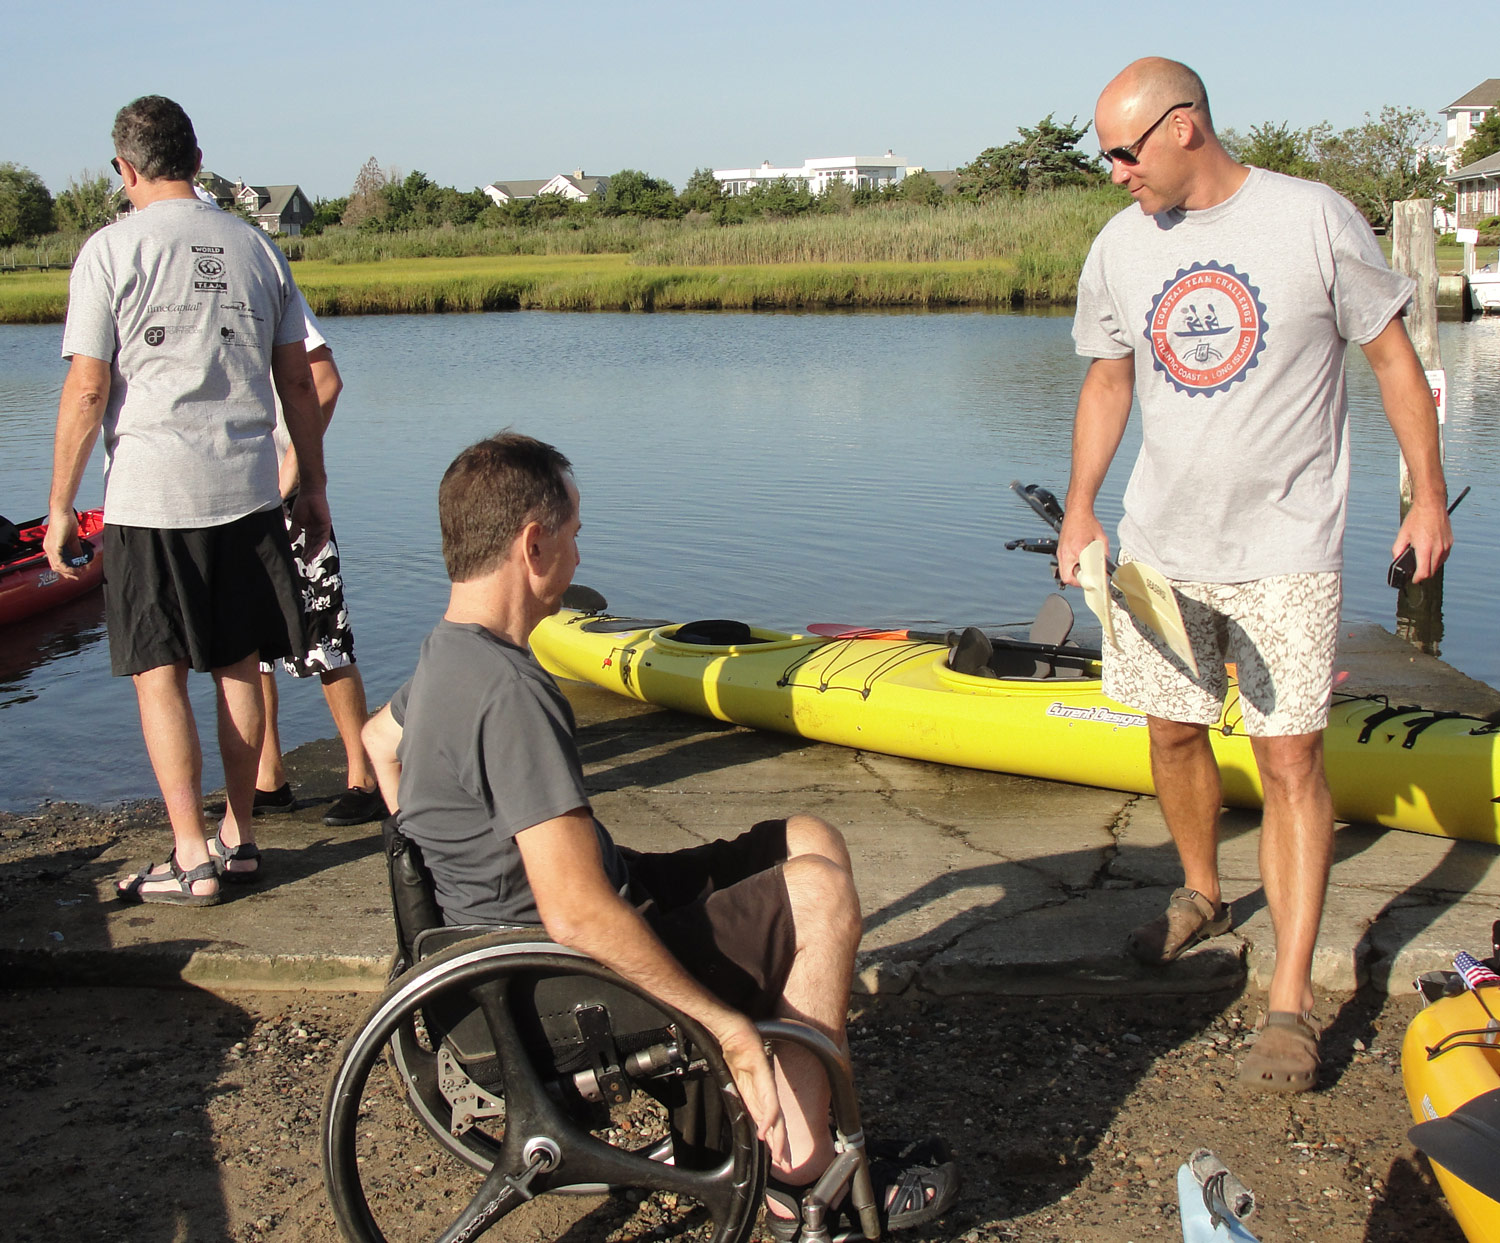 Alex Rohman, right, and George Taborsky, in chair, are directors of the annual Coastal Team Challenge from World T.E.A.M. Sports along the coast of Long Island, New York. Photograph courtesy Alex Rohm